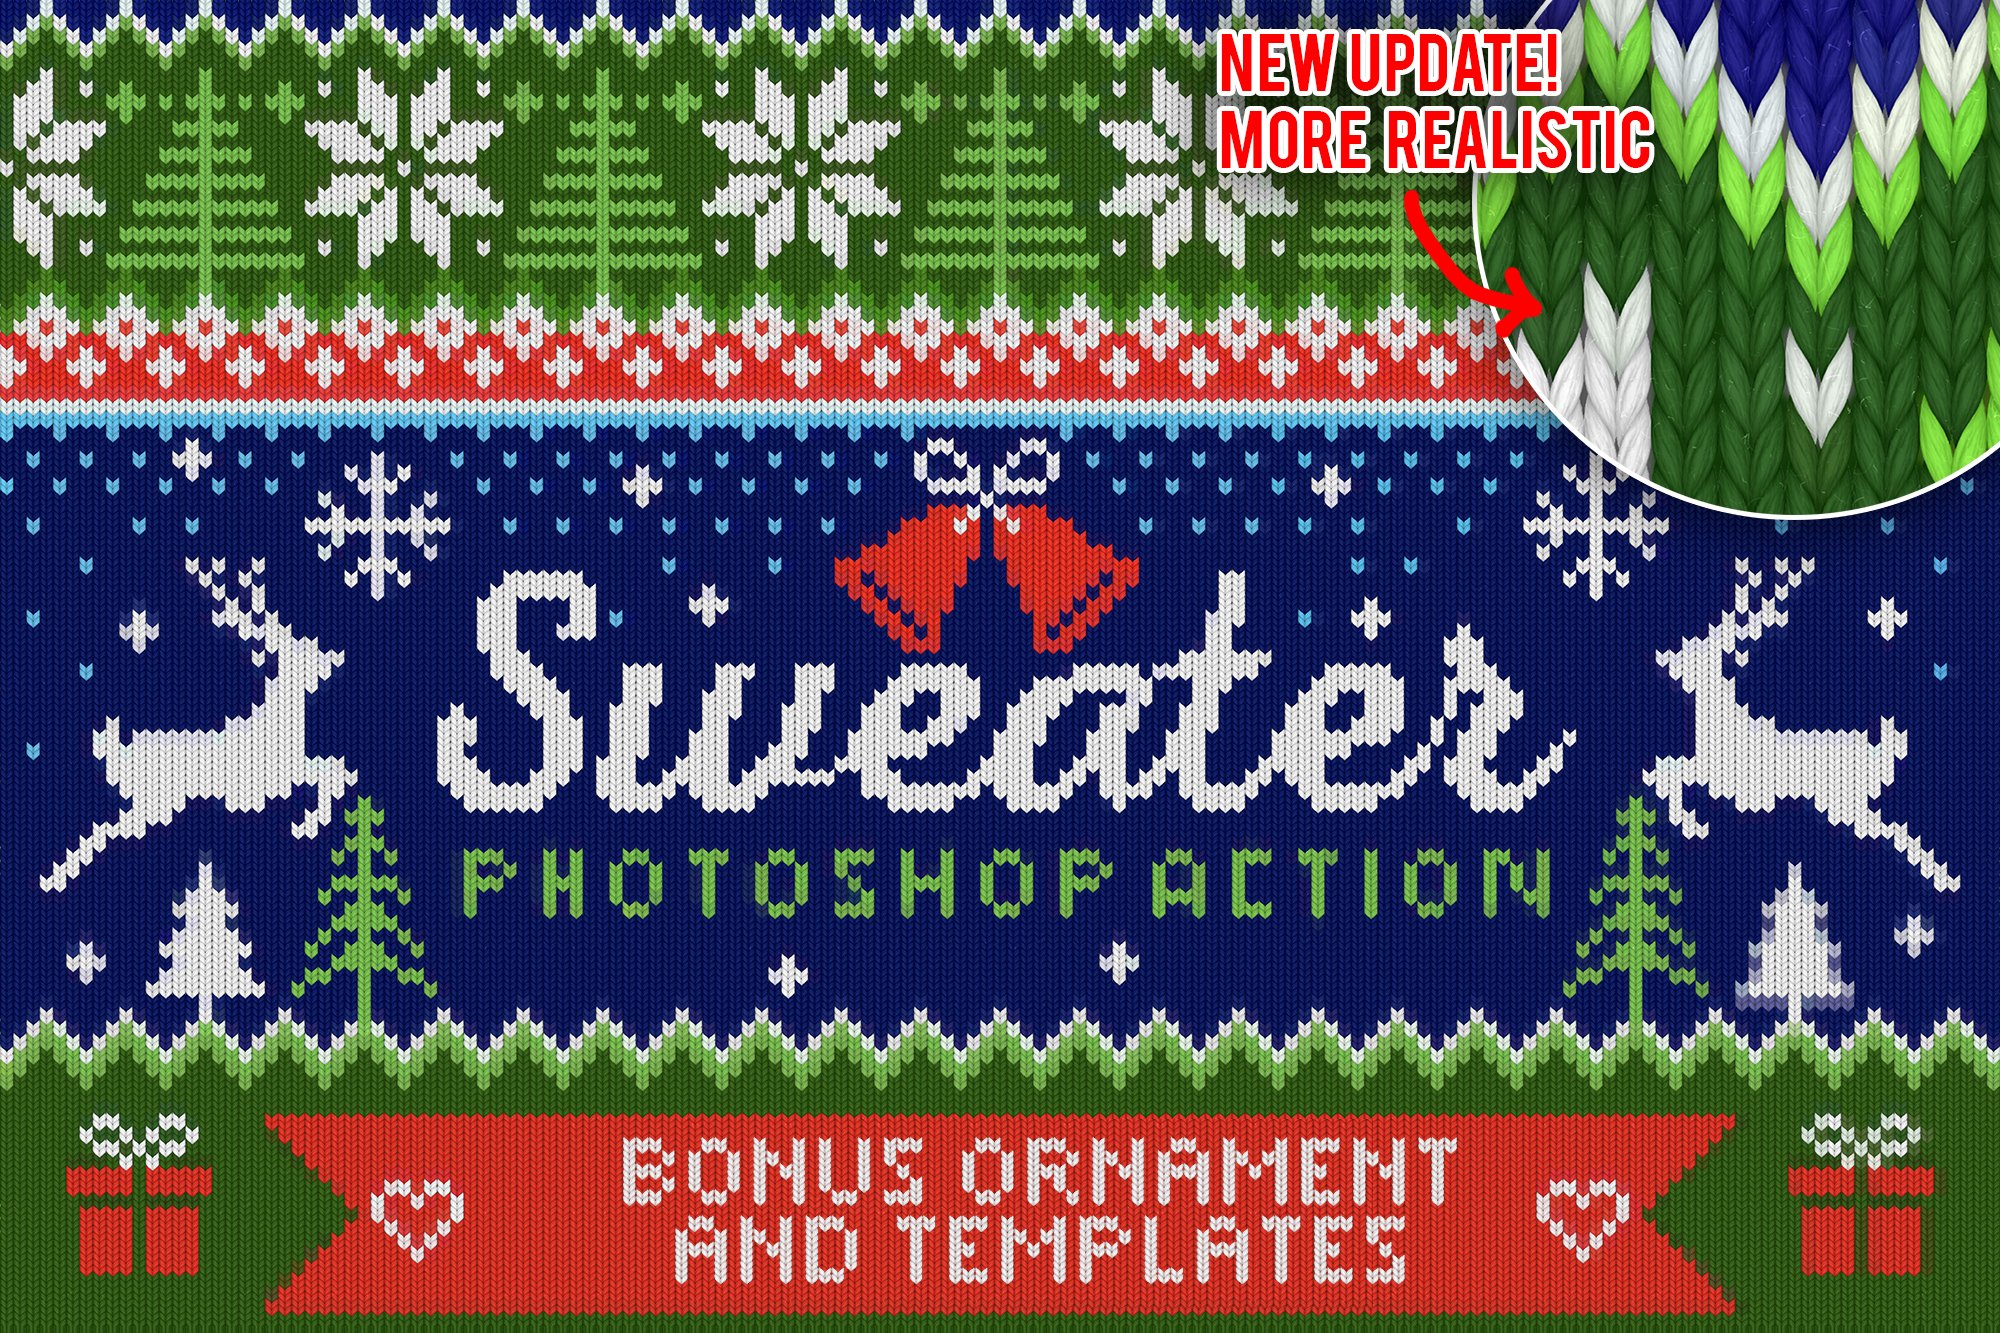 Ugly Christmas Sweater Photoshop Actcover image.